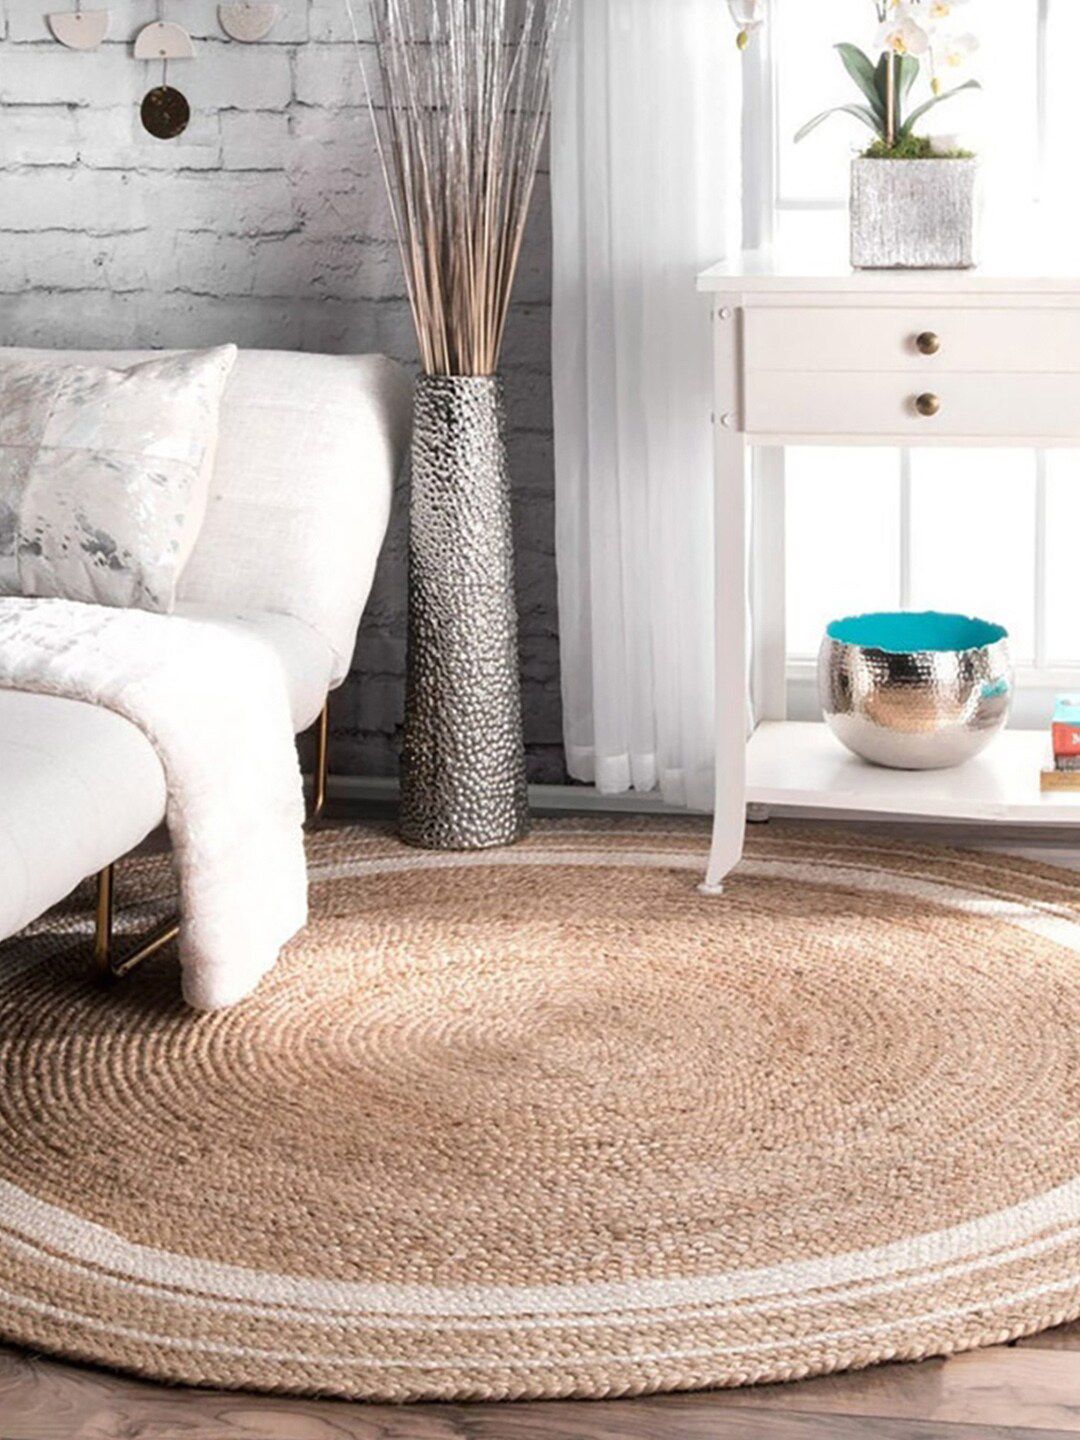 HABERE INDIA Beige Round Shaped Eco-Friendly Braided Jute Carpet Price in India